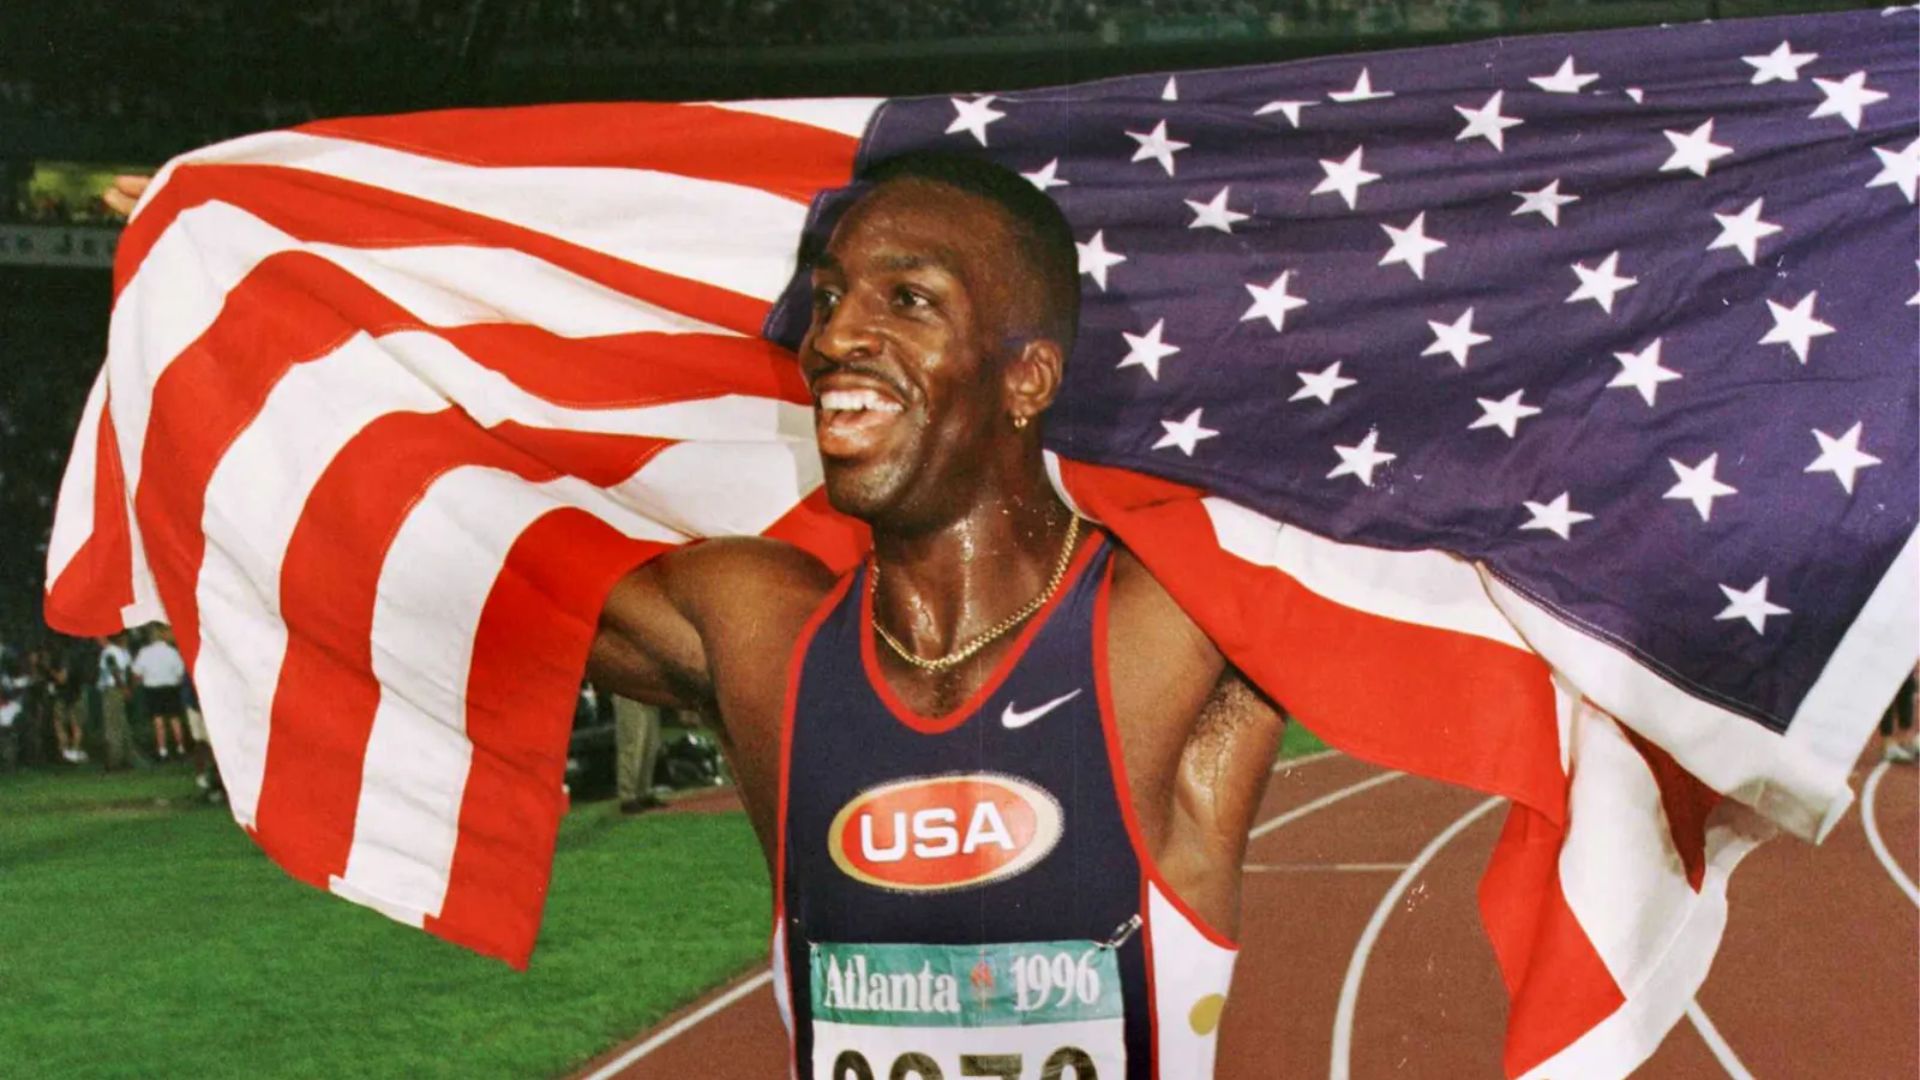 Olympic Gold Medalist Michael Johnson Aims to Launch New Athletics League